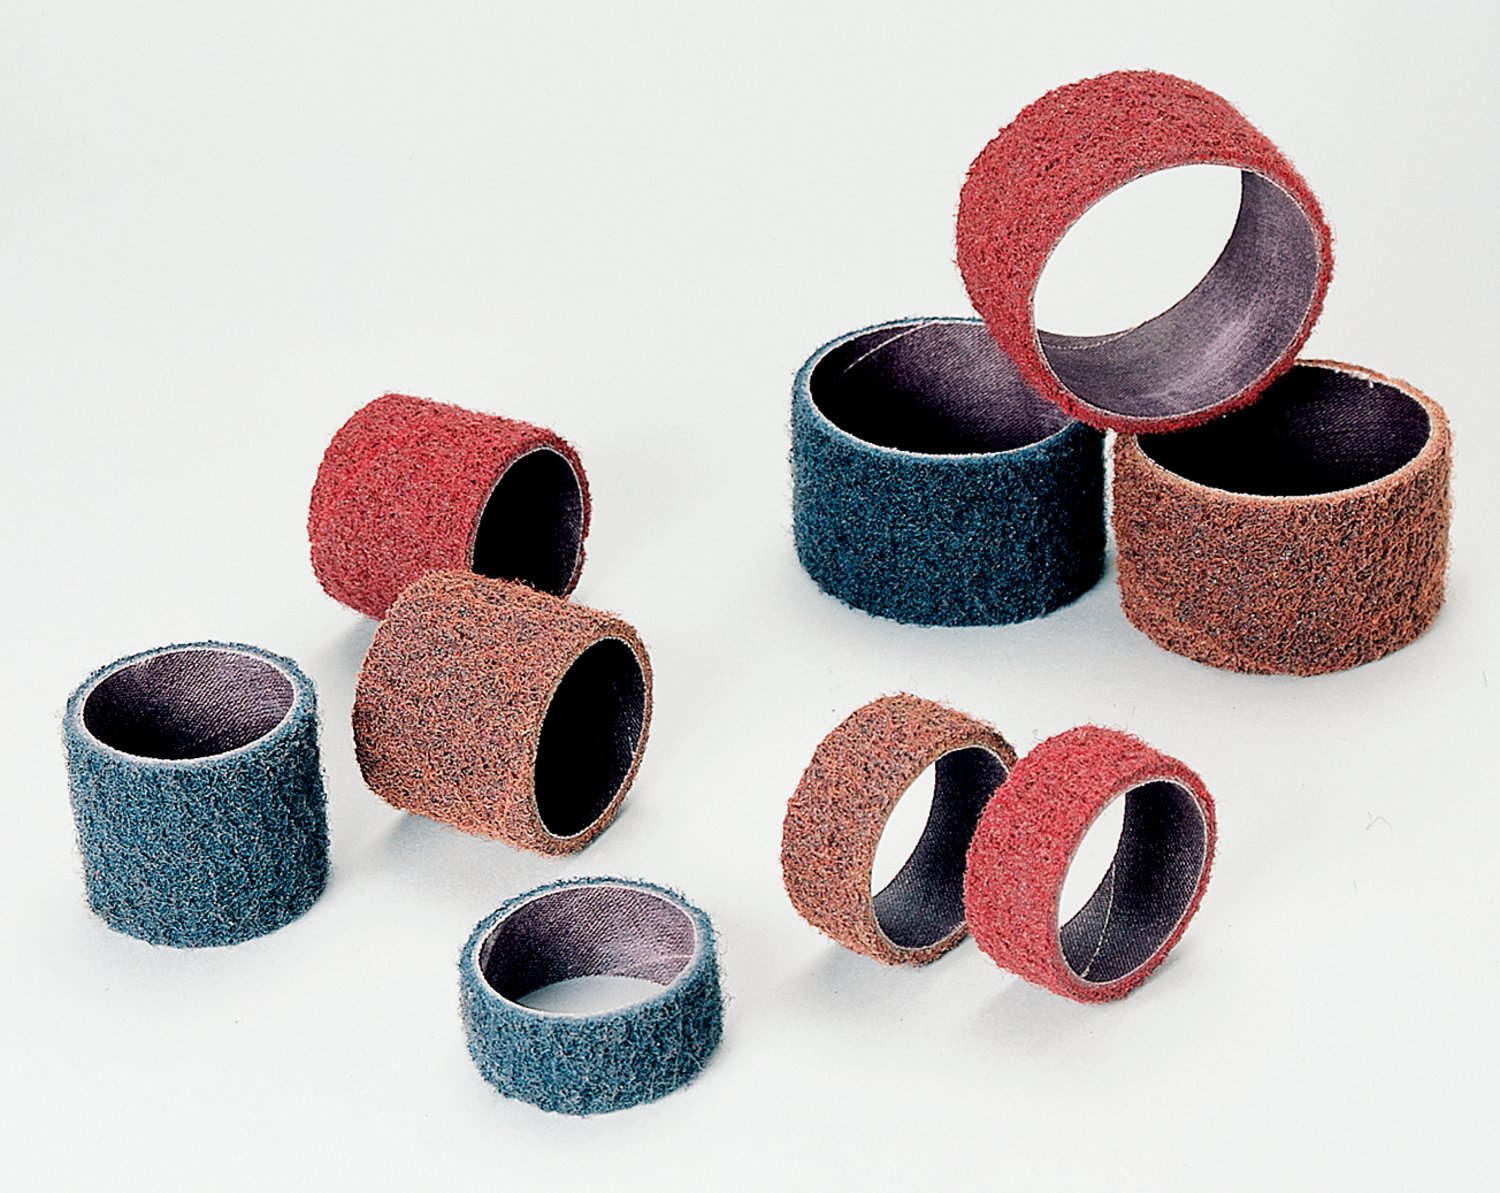 7010294966 - Standard Abrasives Surface Conditioning Band 727100, 2 in x 2 in VFN,
10/Carton, 100 ea/Case